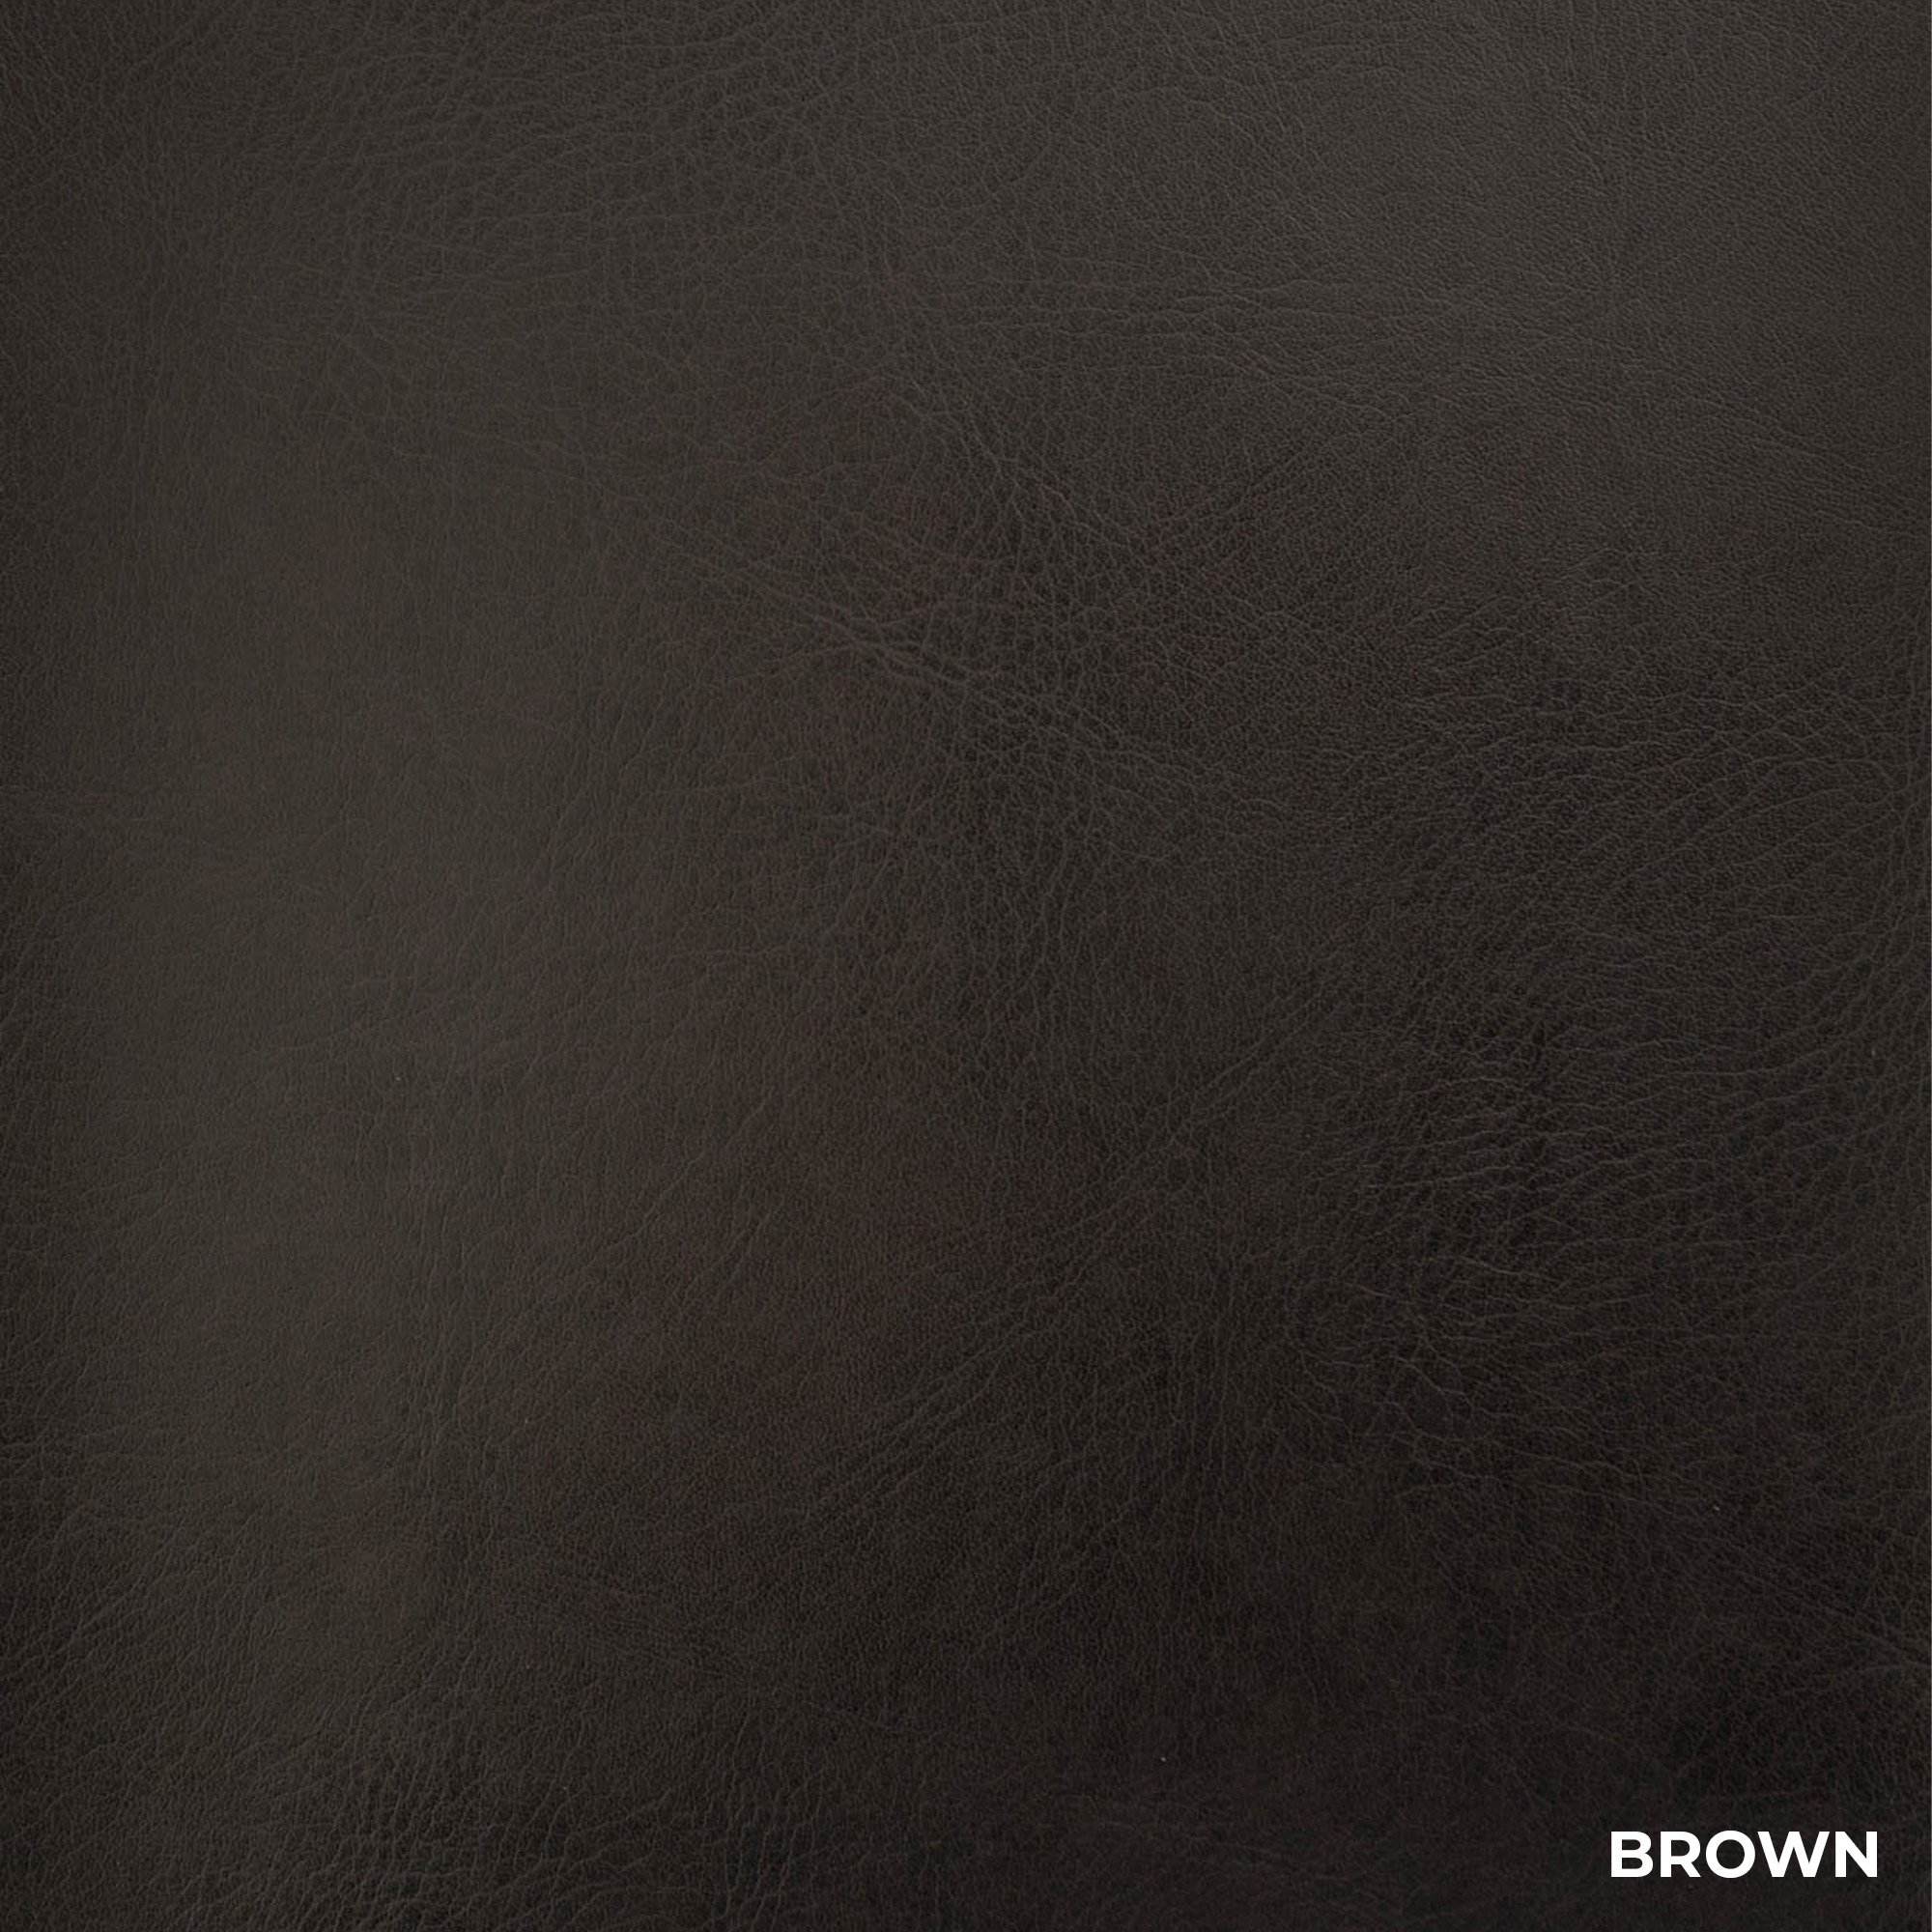 Brown Slimline closeup of your new material menu jackets.